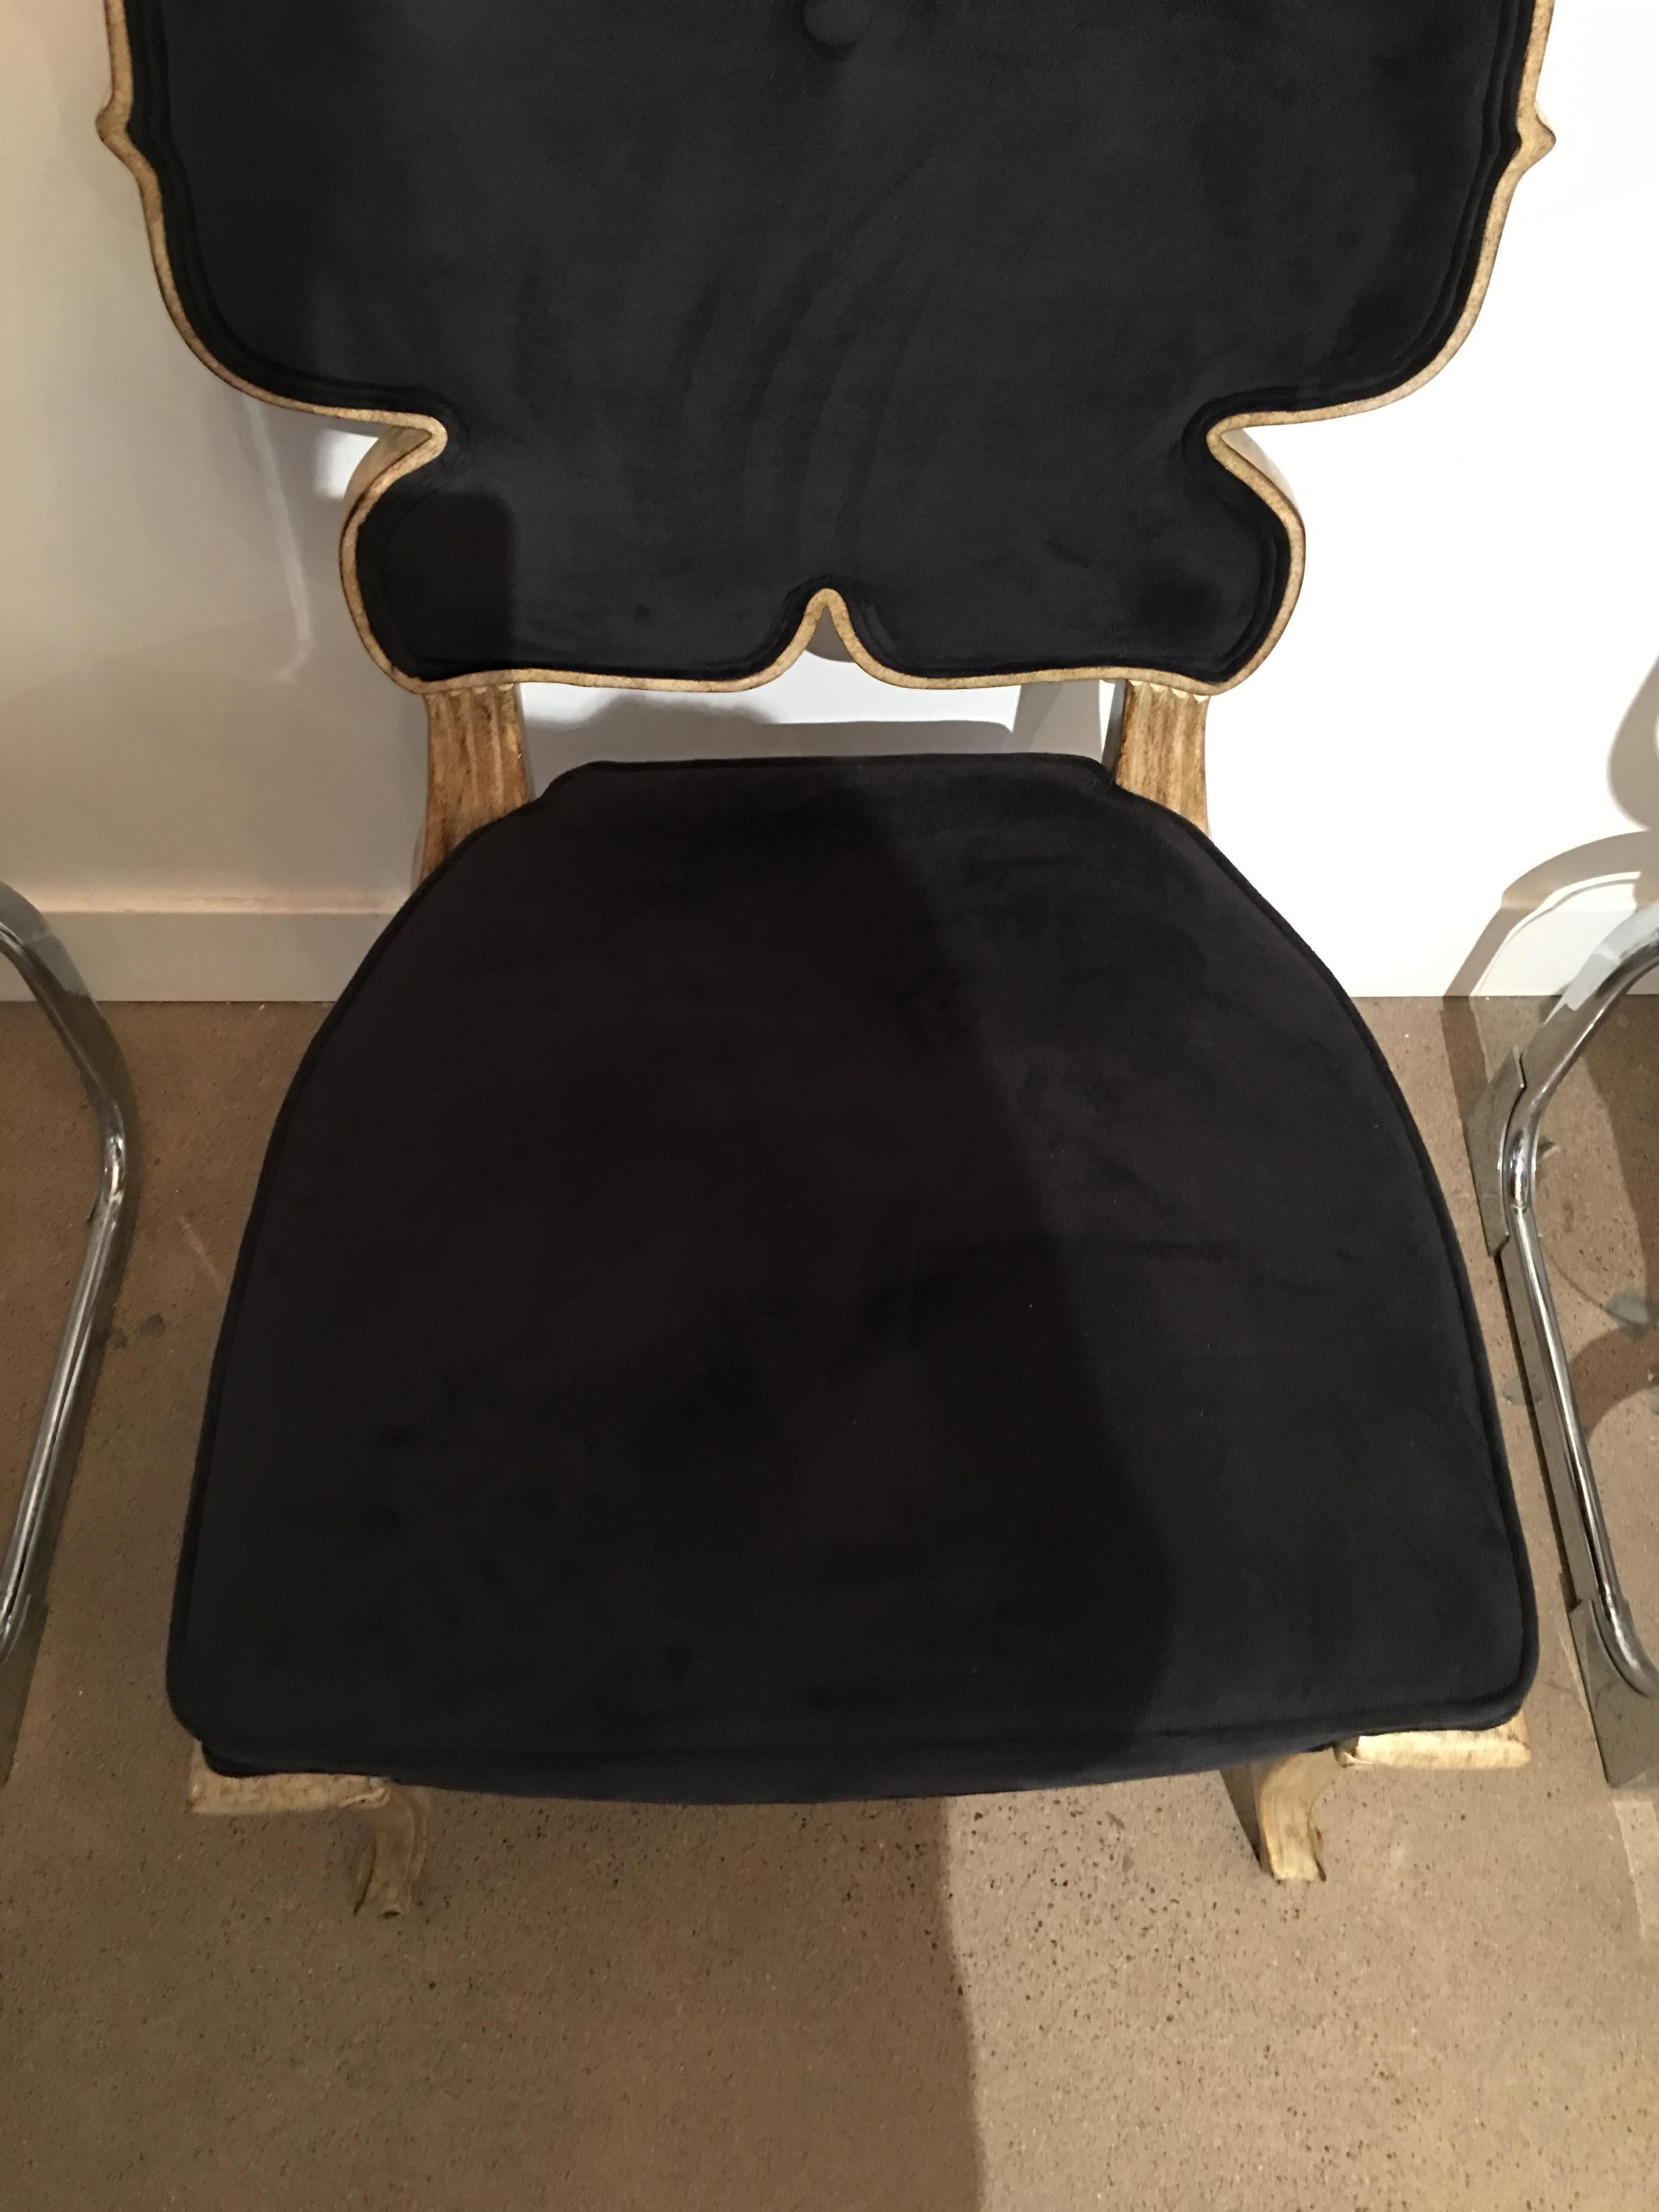 Julia Buckingham for Global Views Black Wiggle Chair In Excellent Condition For Sale In Phoenix, AZ